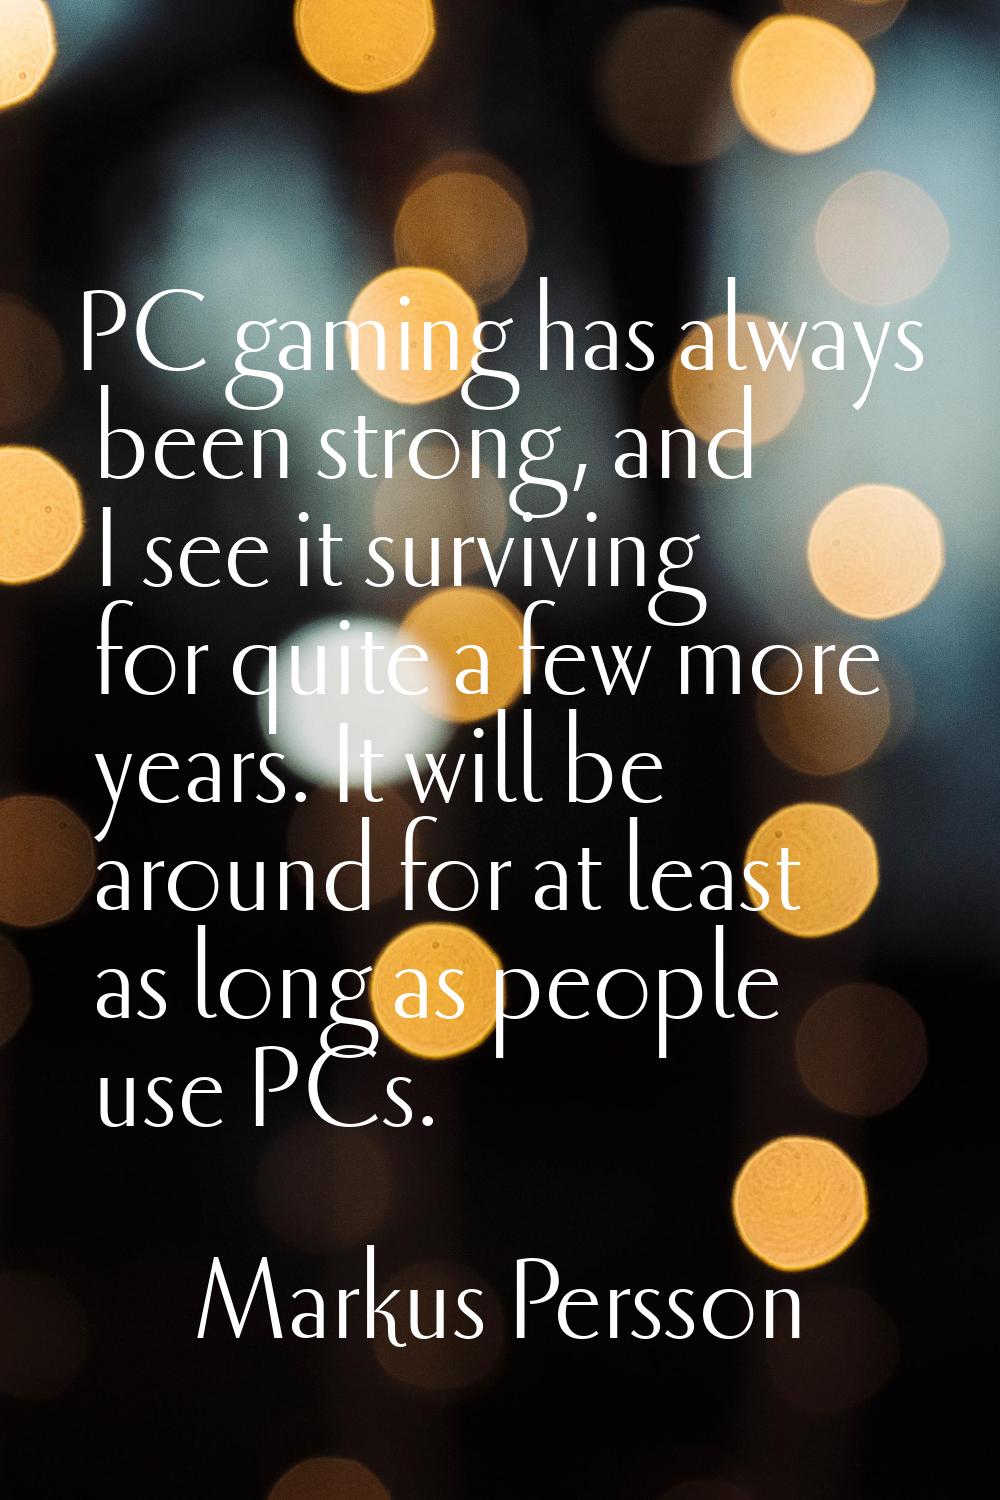 PC gaming has always been strong, and I see it surviving for quite a few more years. It will be aro